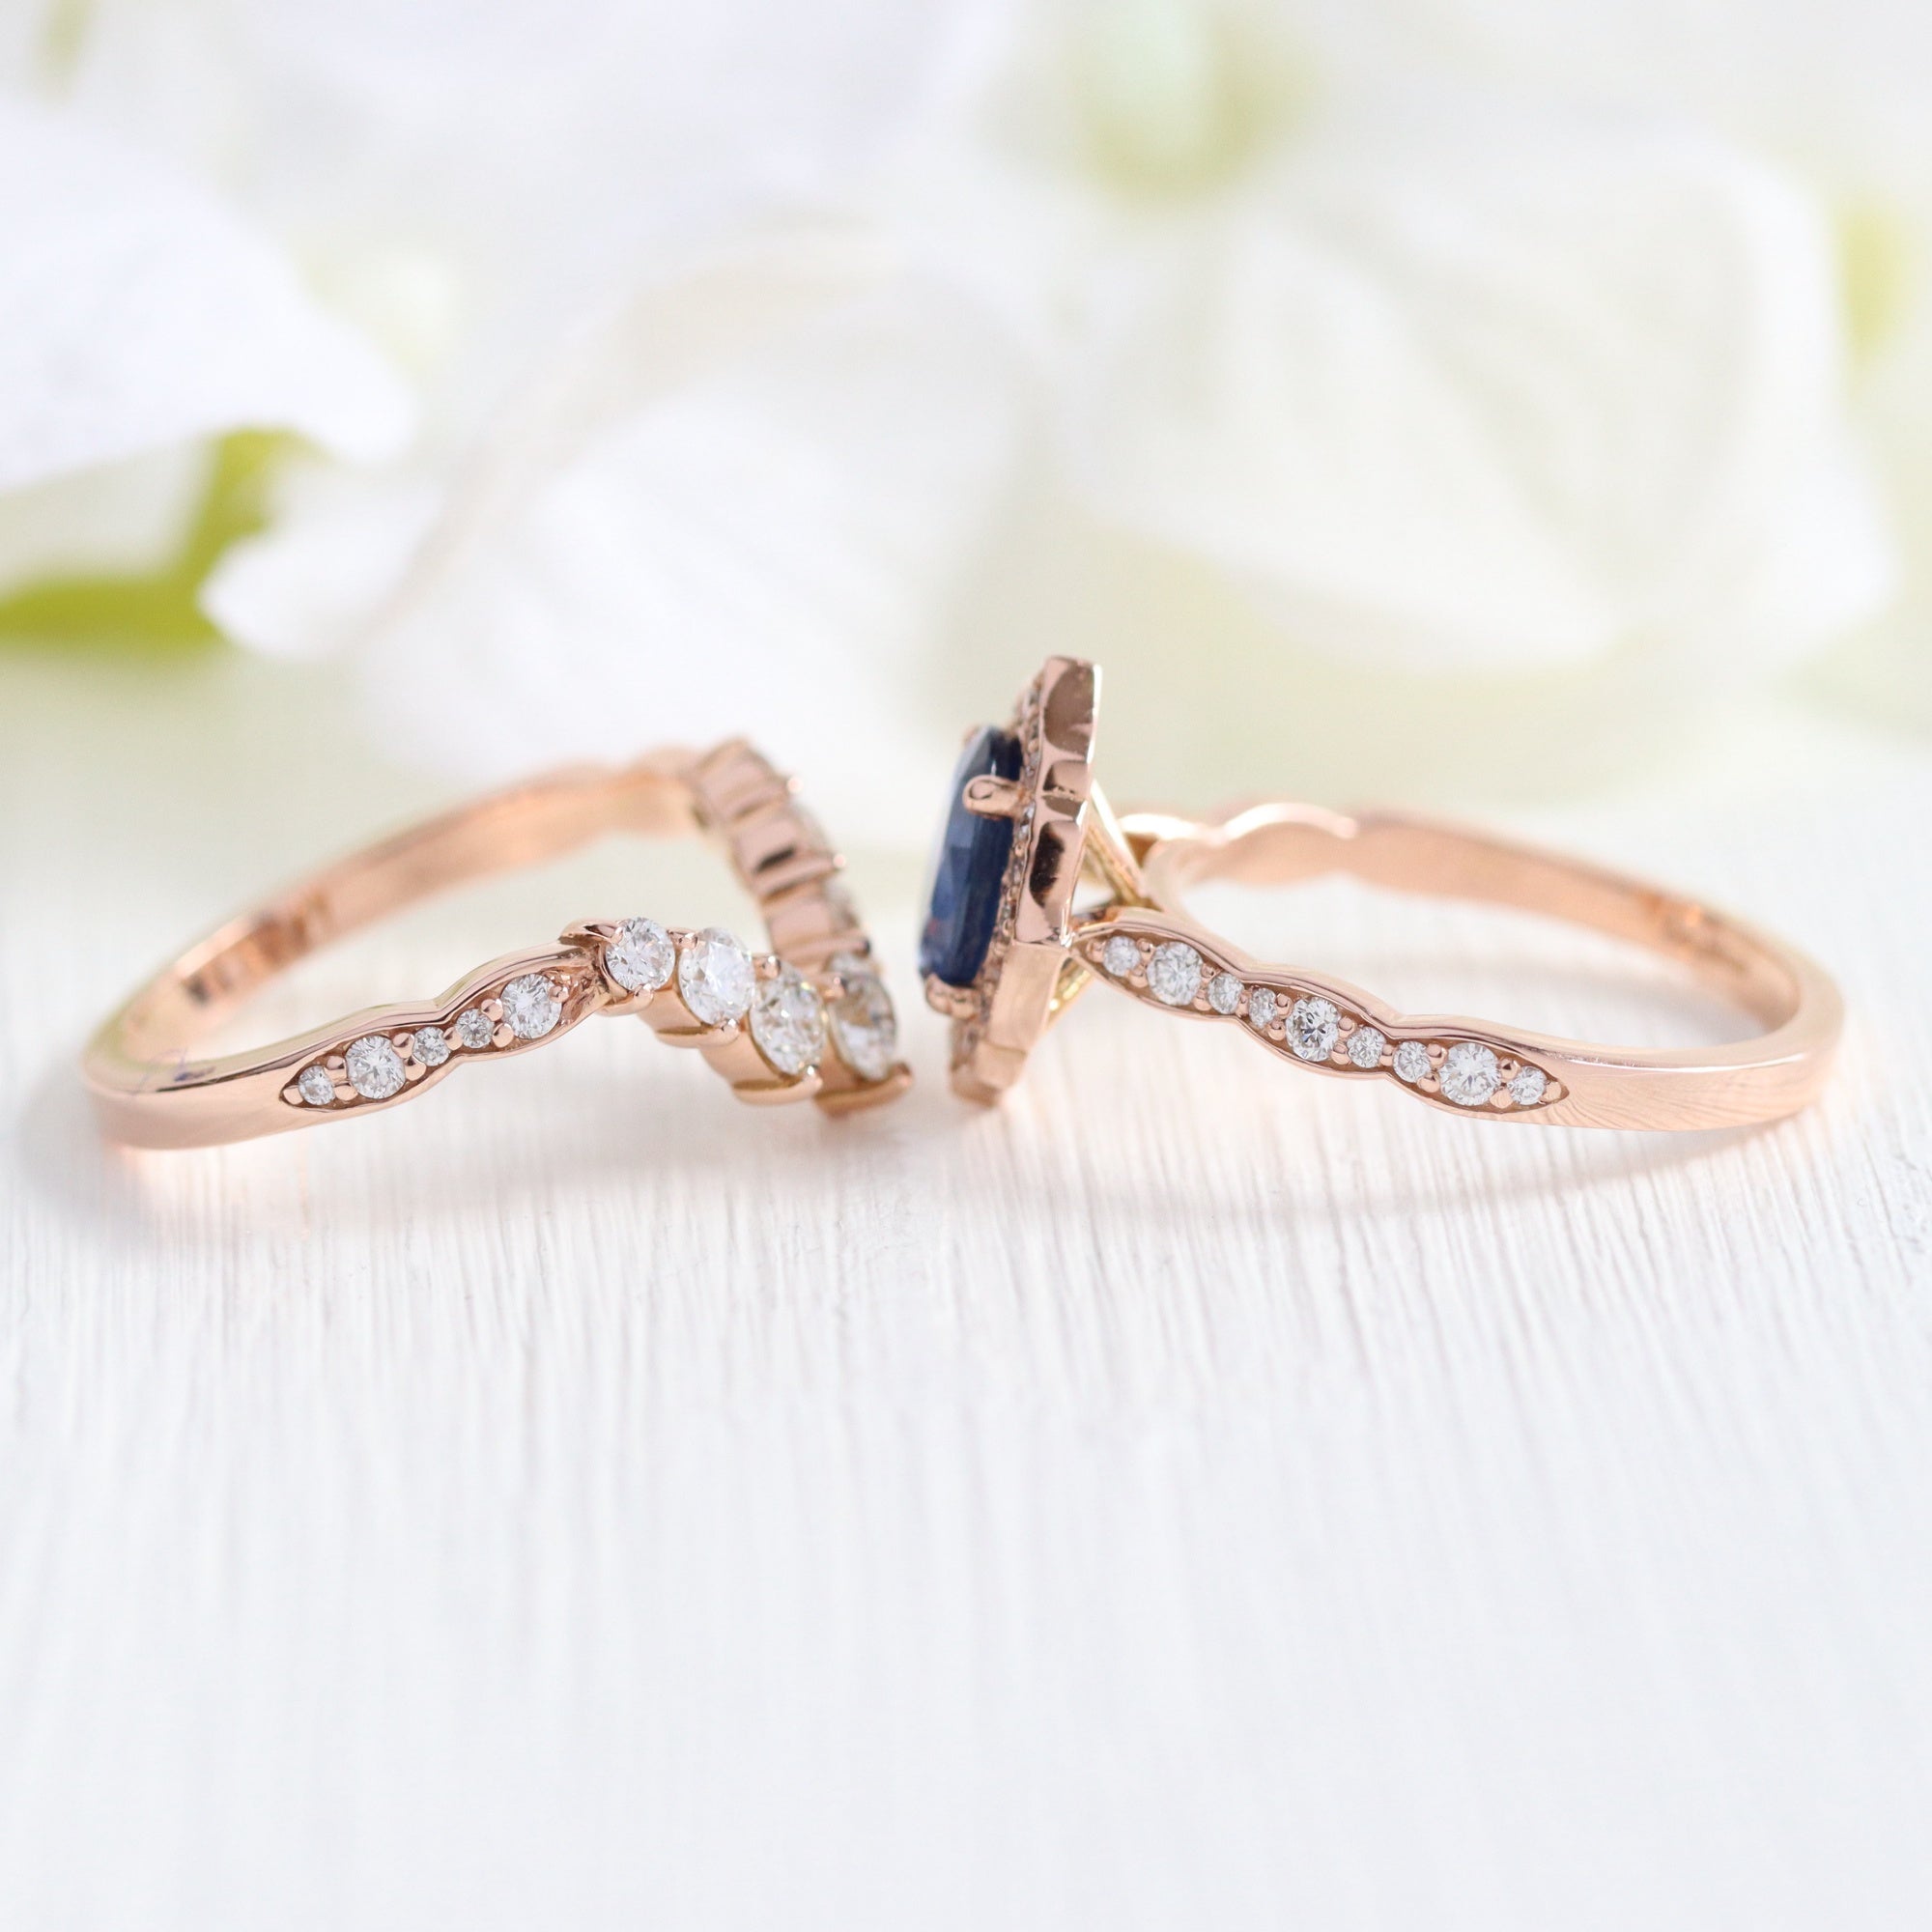 Vintage halo diamond sapphire ring stack rose gold oval curved diamond wedding band la more design jewelry